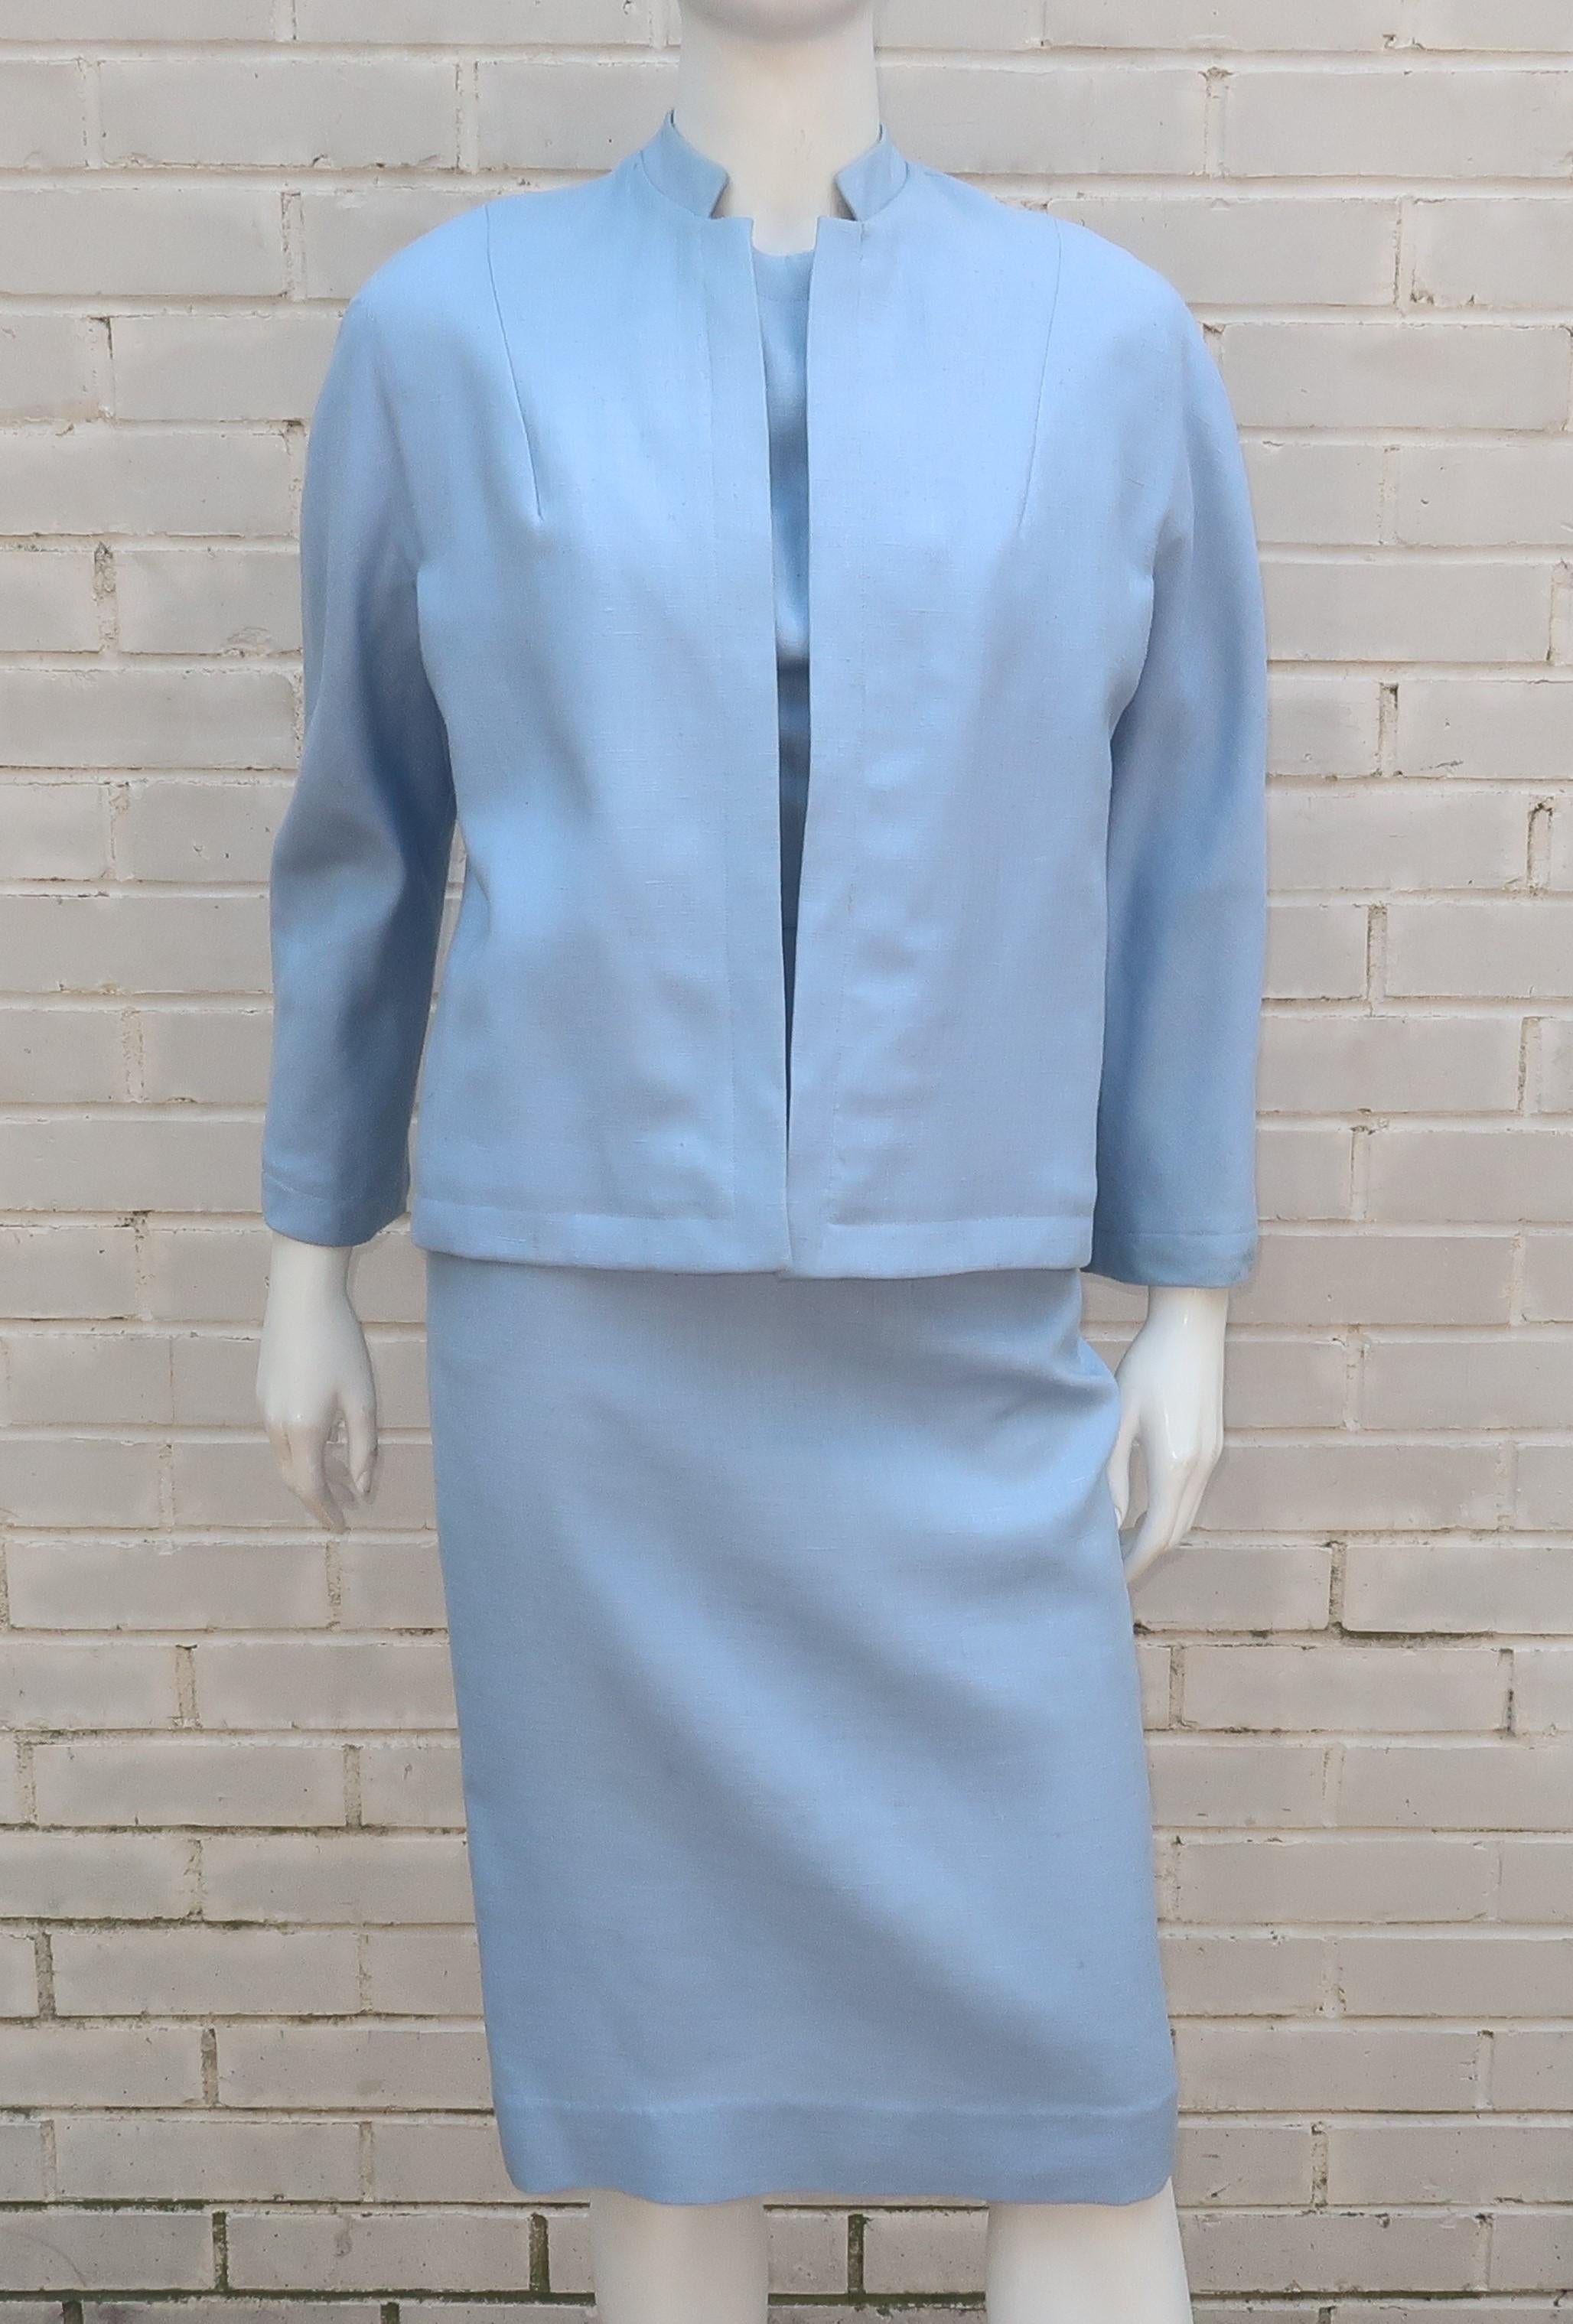 C.1960 pale blue linen dress and jacket ensemble with surprise beading at the interior lining of the jacket.  The form fitting dress has a 'wiggle' silhouette with a modified scoop back.  It zips and hooks at the back with a coordinating belt at the